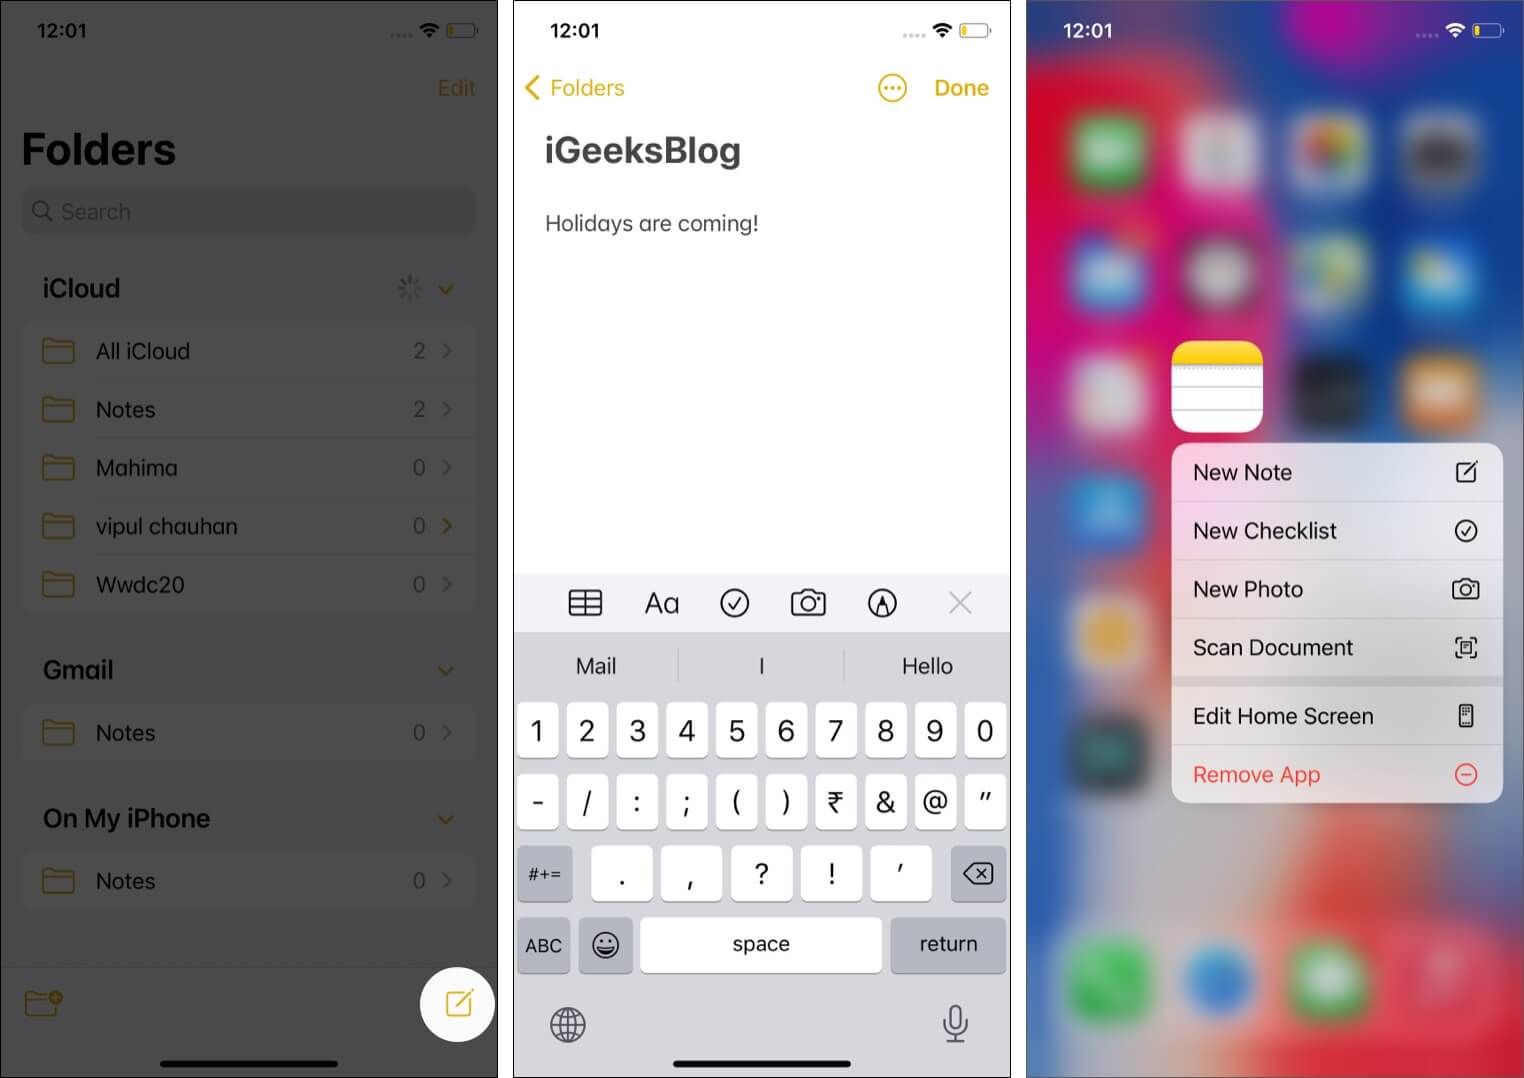 Create a new note in apple notes app